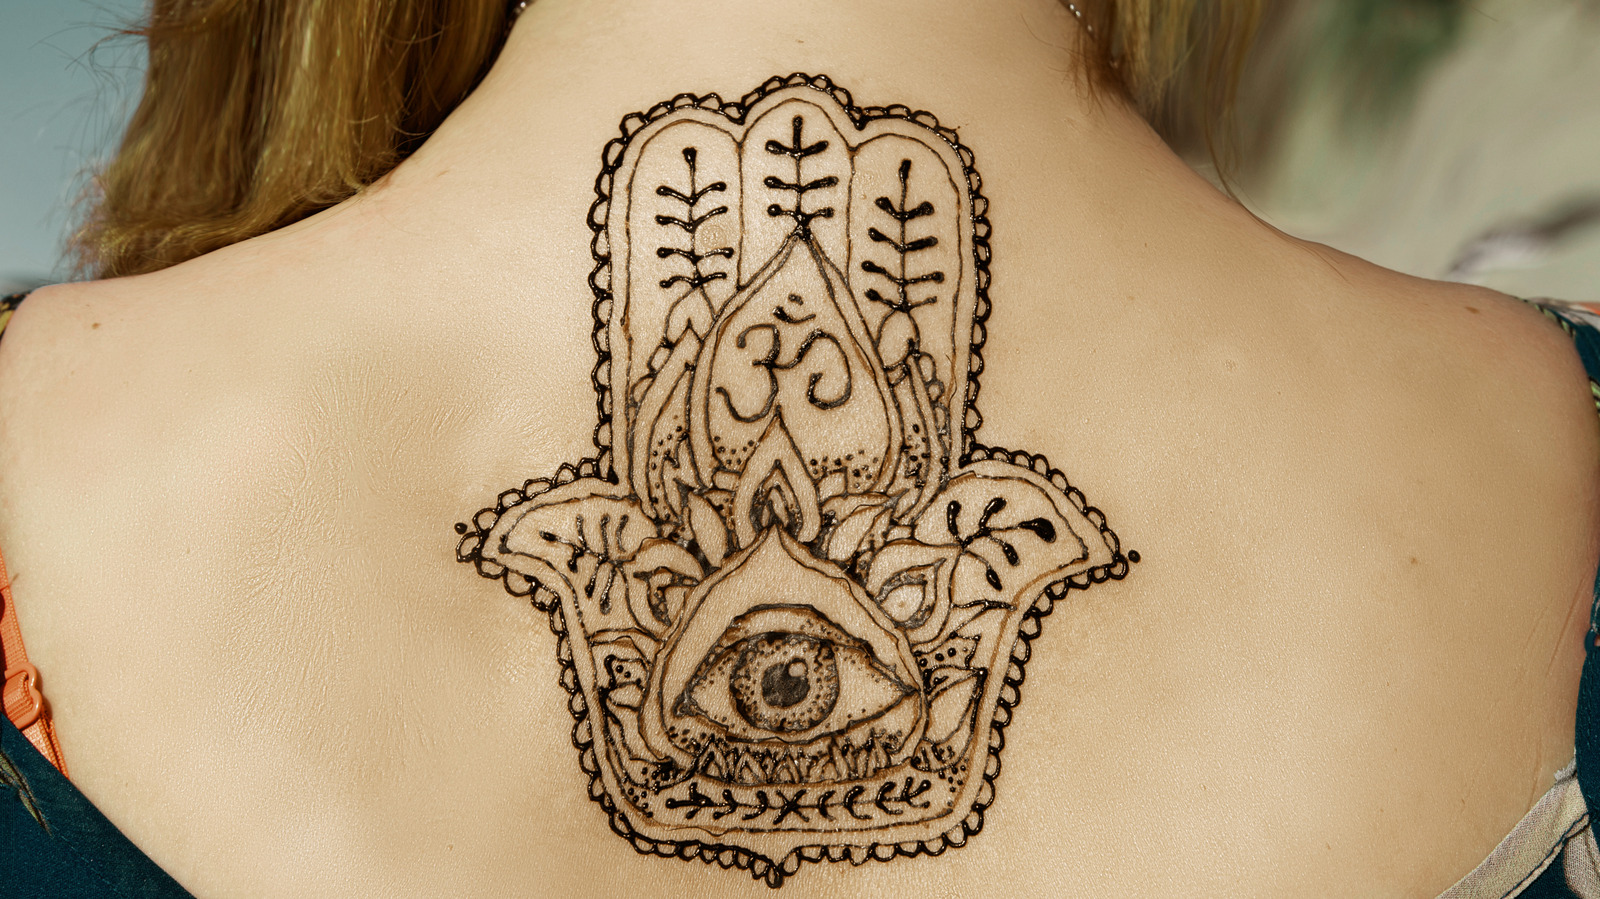 What You Should Know About The Spiritual Tattoo Trend